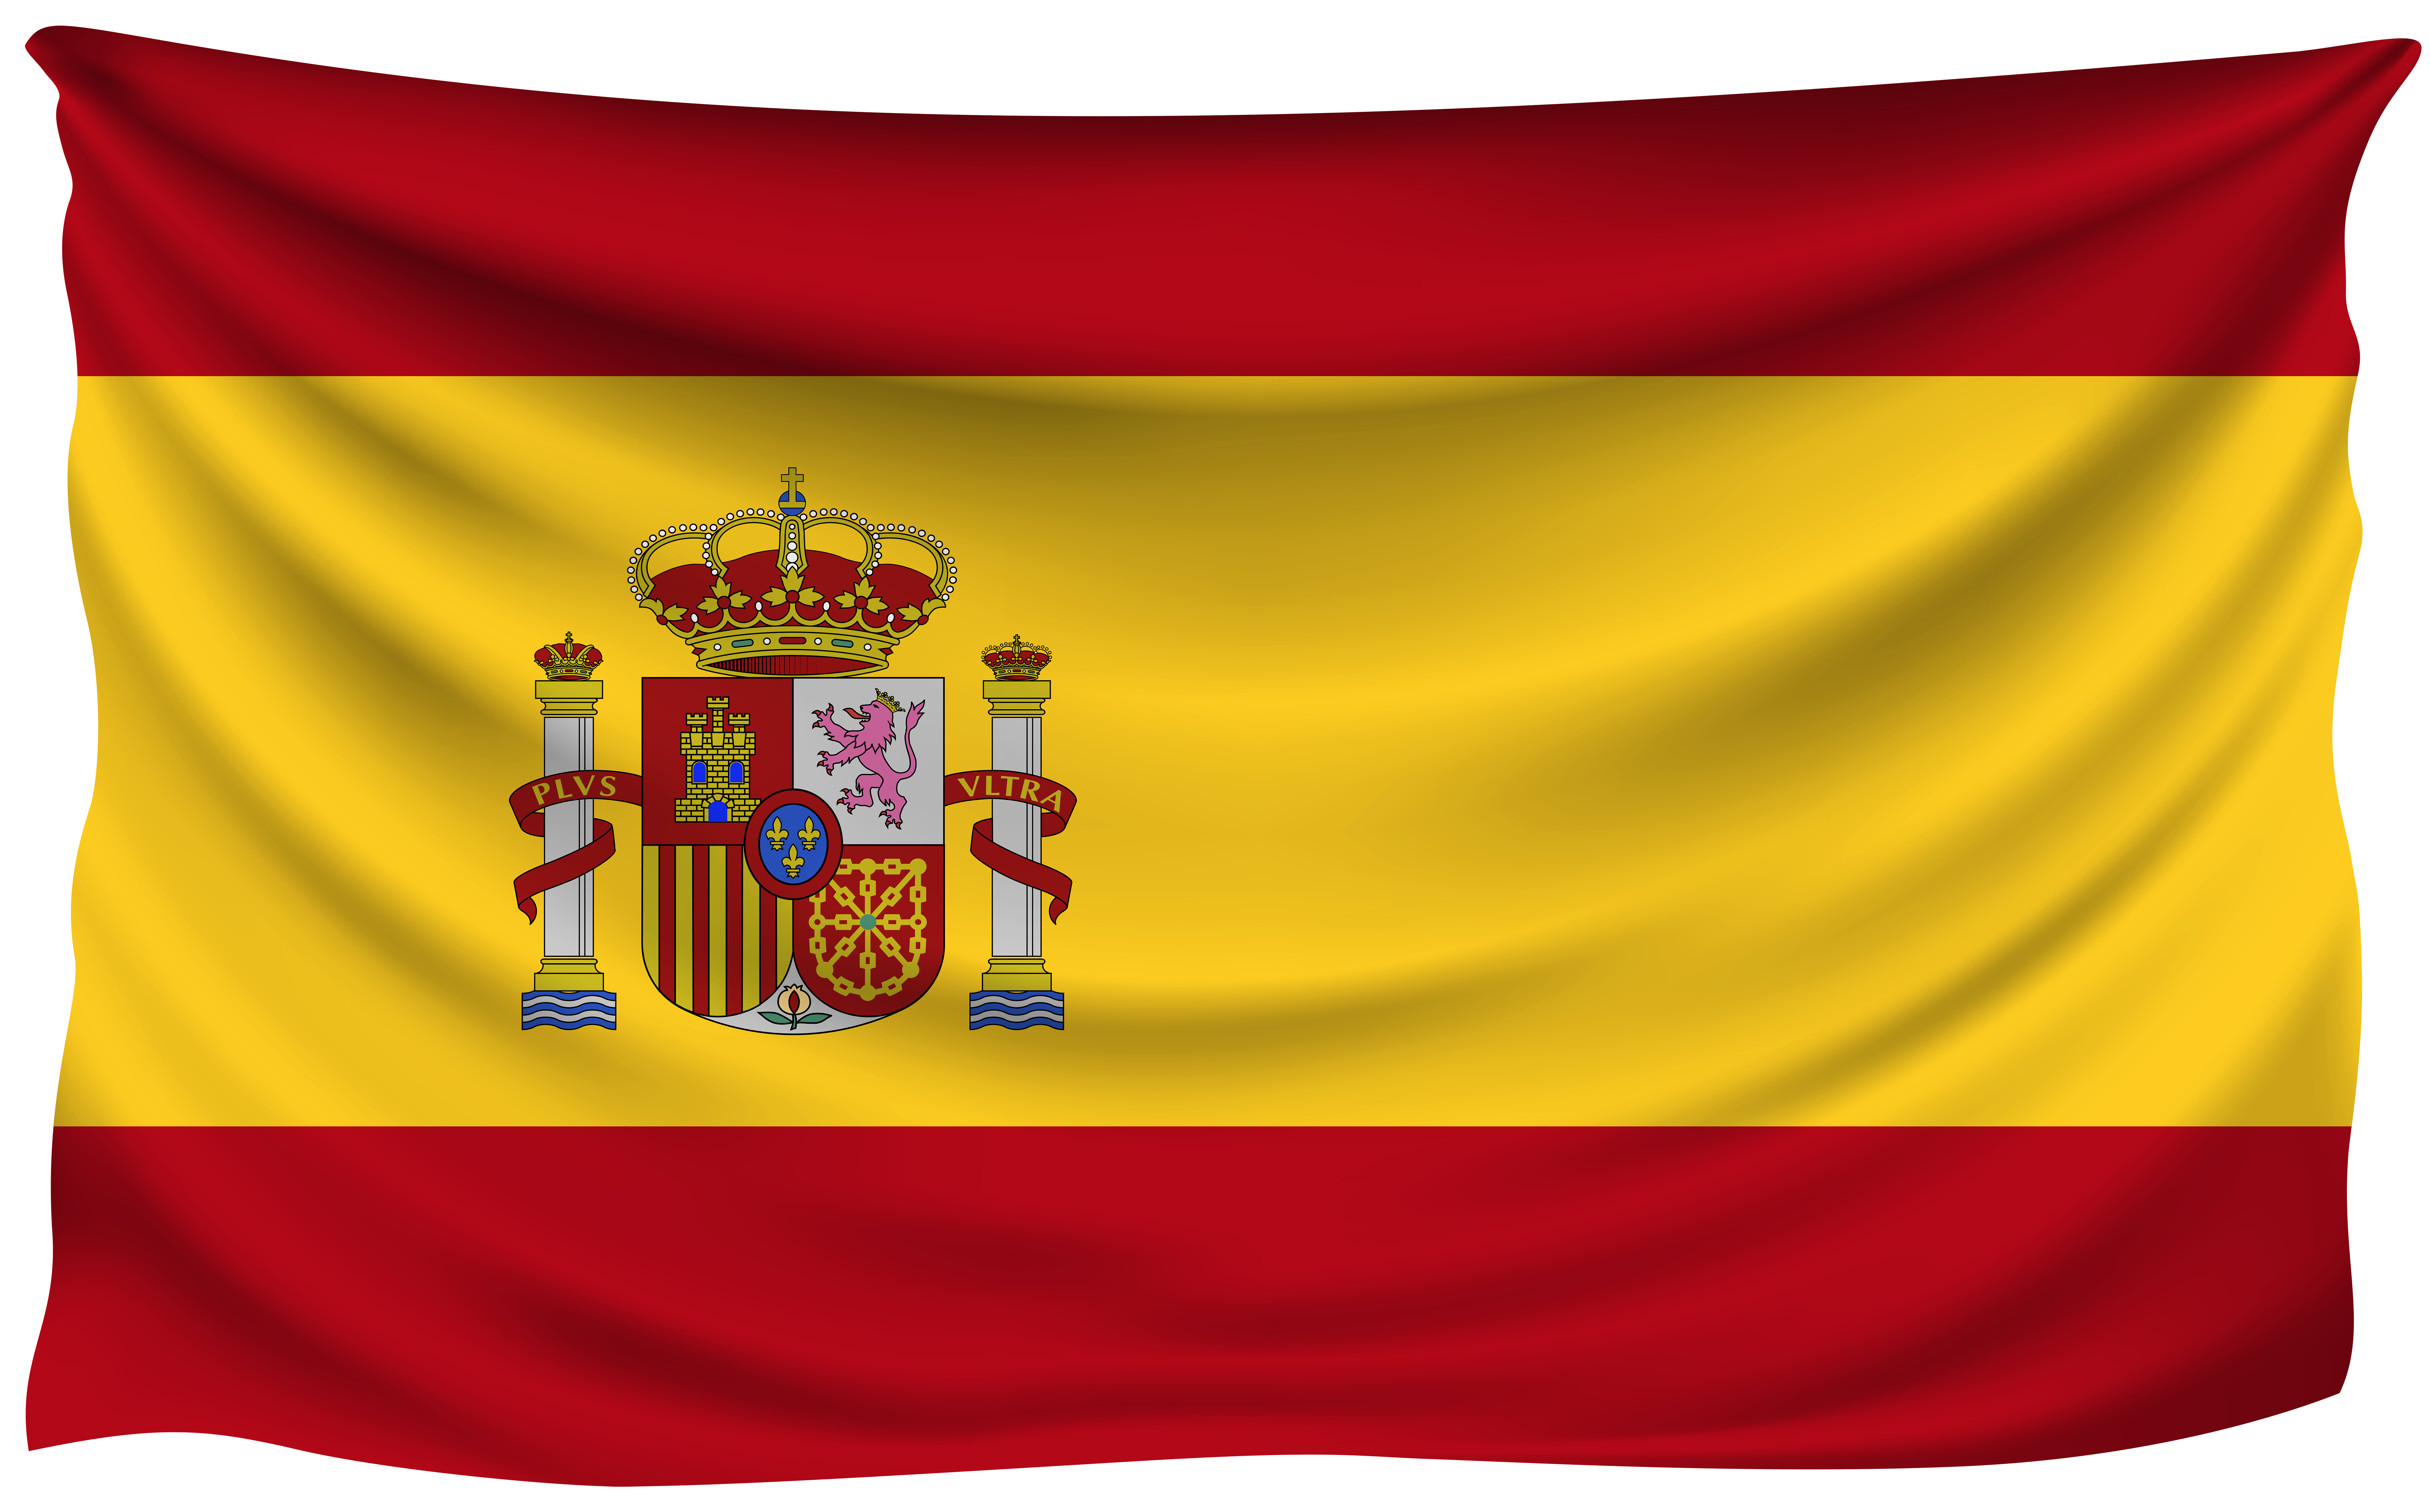 Spain Wrinkled Flag | Gallery Yopriceville - High-Quality Images and